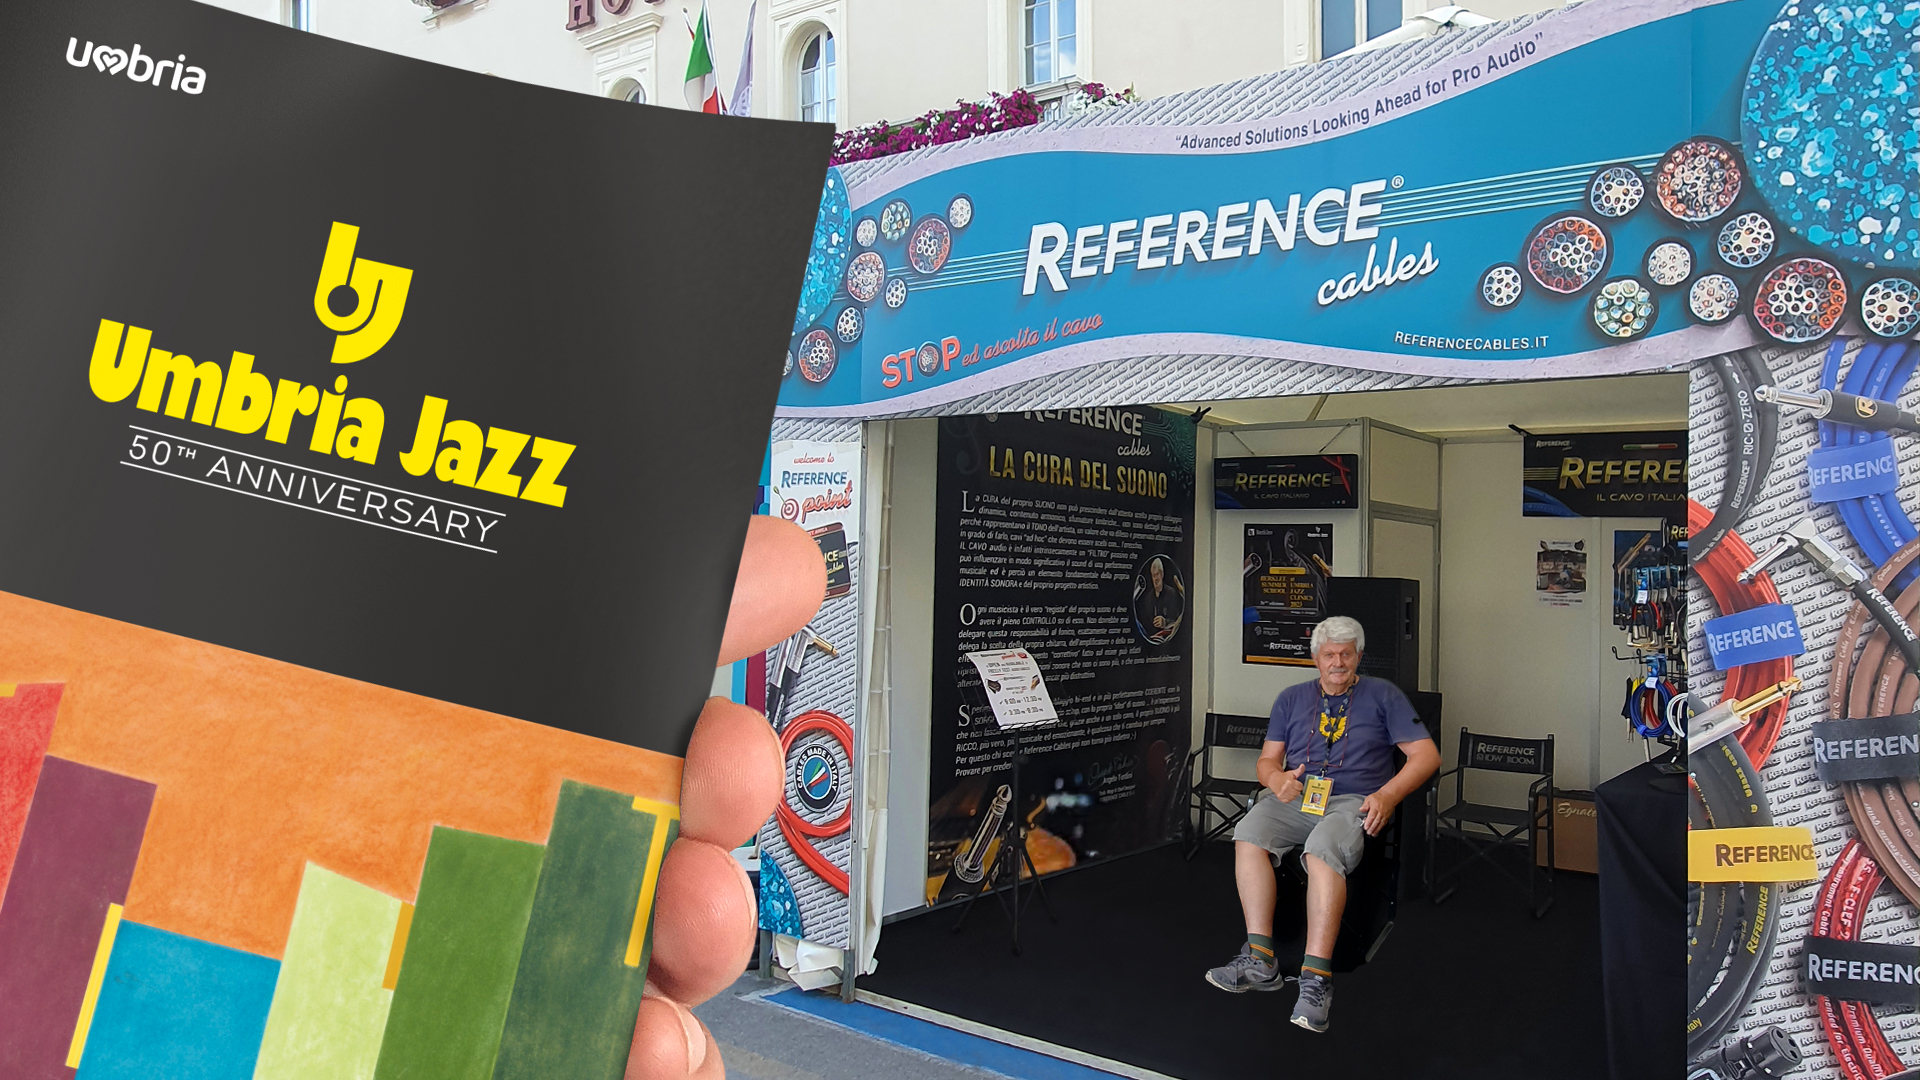 Reference® Point at UMBRIA JAZZ 50th Anniversary